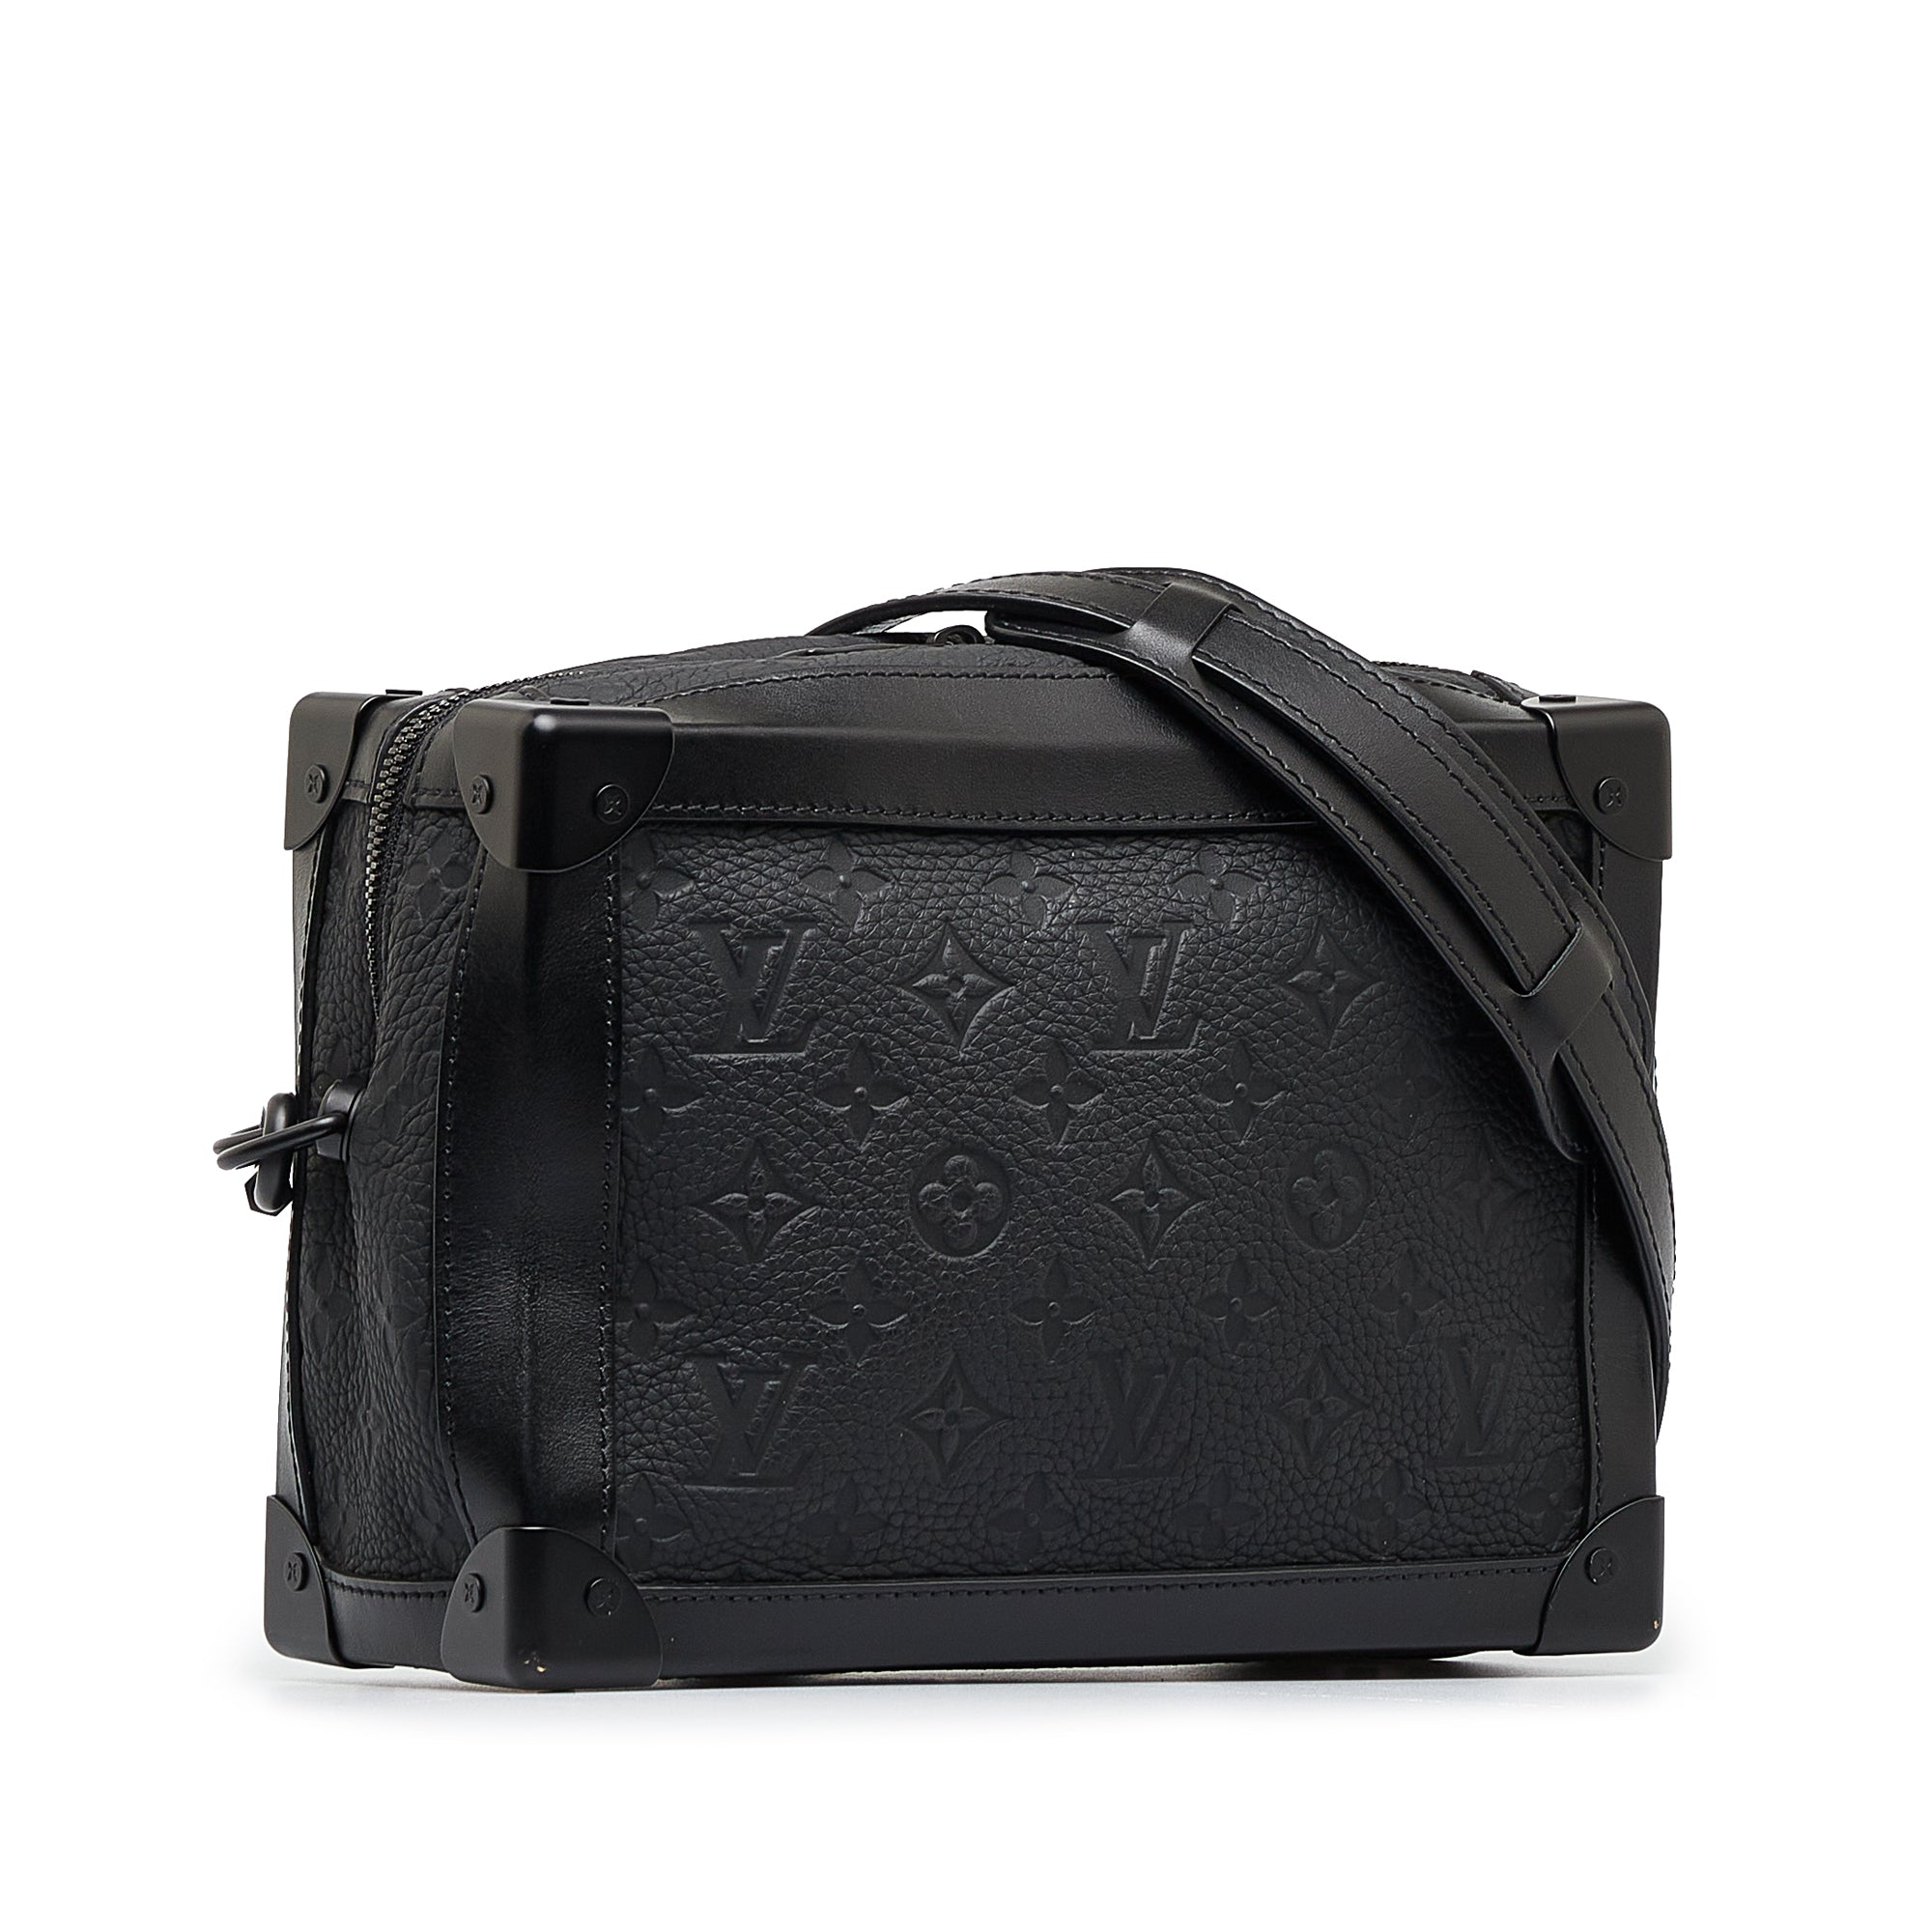 Louis Vuitton Soft Trunk Monogram Black in Taurillon Leather with